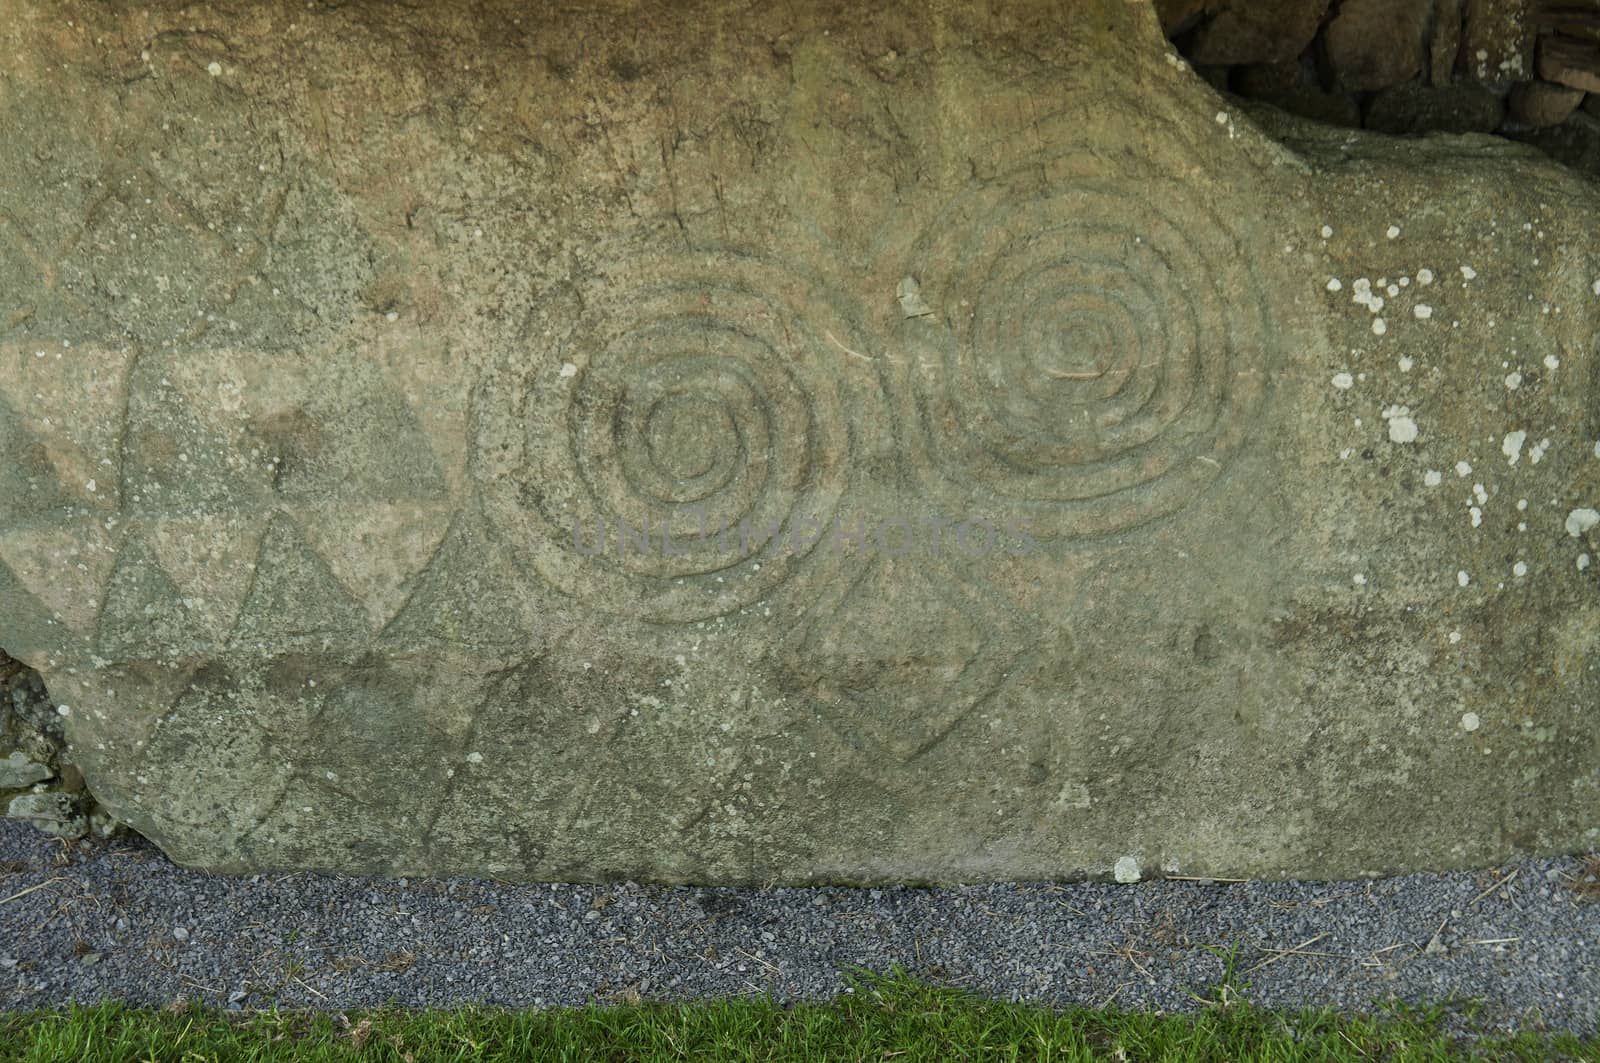 It is a Celtic and pre-Celtic symbol found on a number of Irish Megalithic and Neolithic sites, most notably inside the Newgrange passage tomb, on the entrance stone, and on some of the curbstones surrounding the mound.